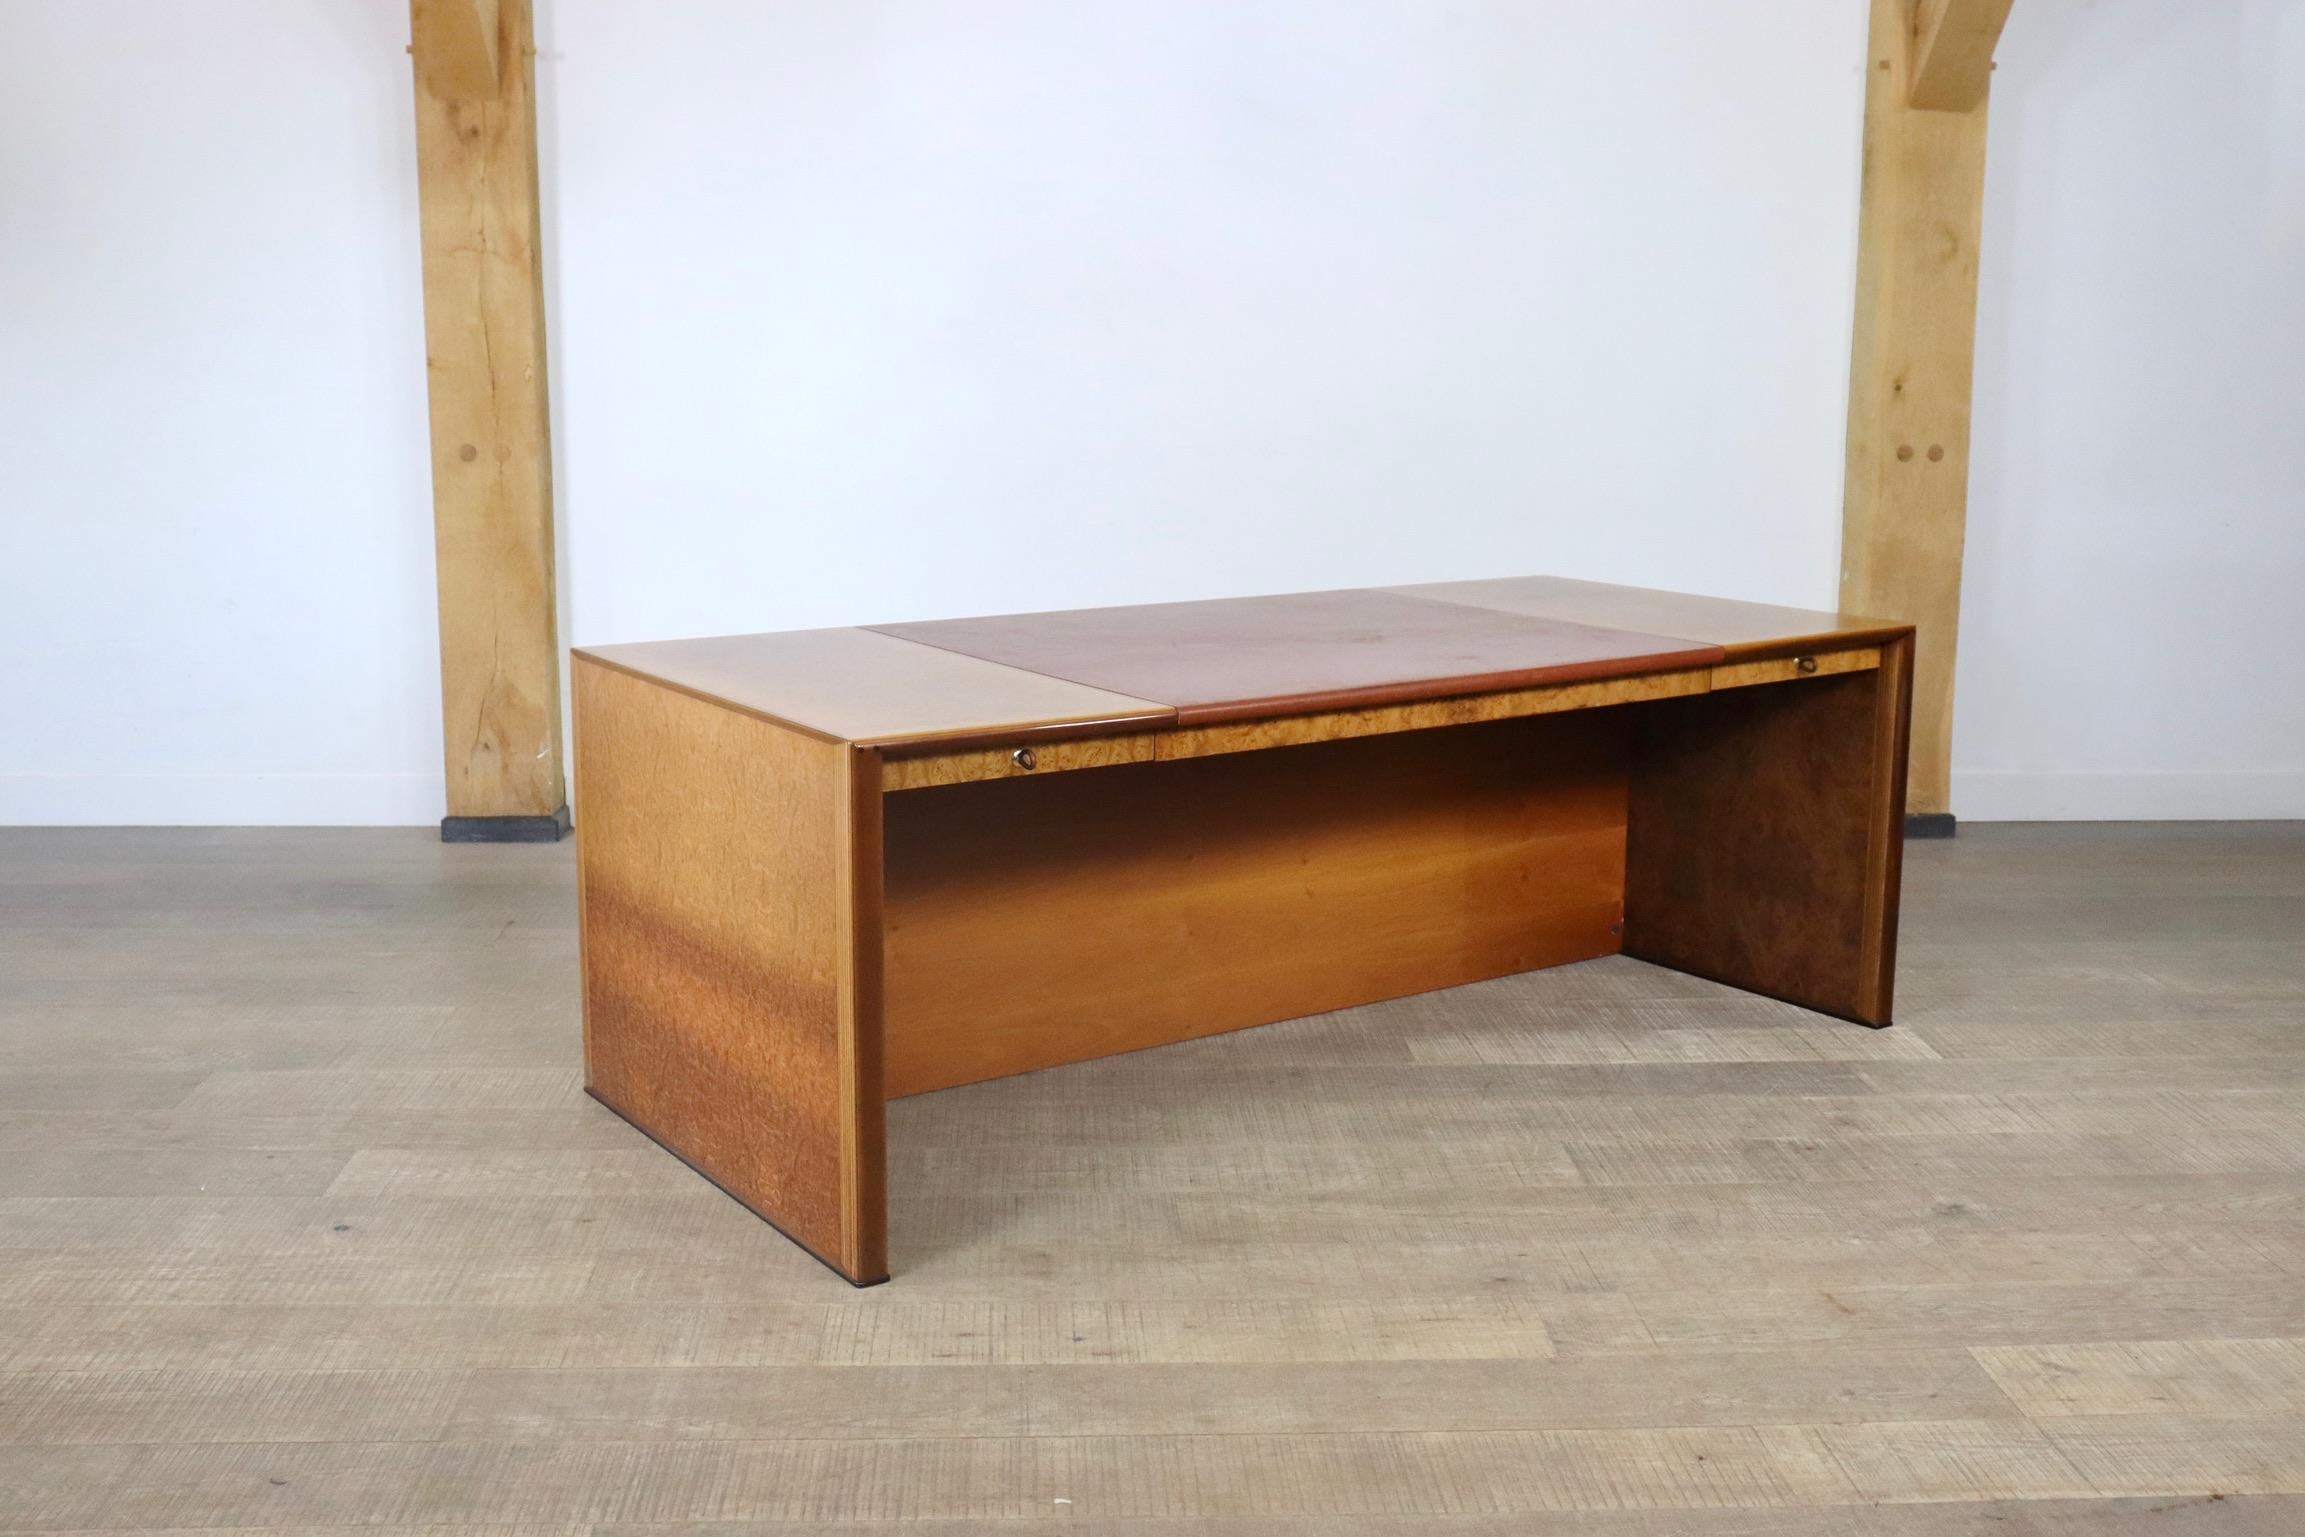 Incredible Artona series writing desk for Maxalto, designed by Afra & Tobia Scarpa, 1979 and produced by Maxalto, Italy. 
The stunning laquered walnut burl and ebony wood give a luxurious and warm feeling to any space. Tobia & Afra Scarpa for